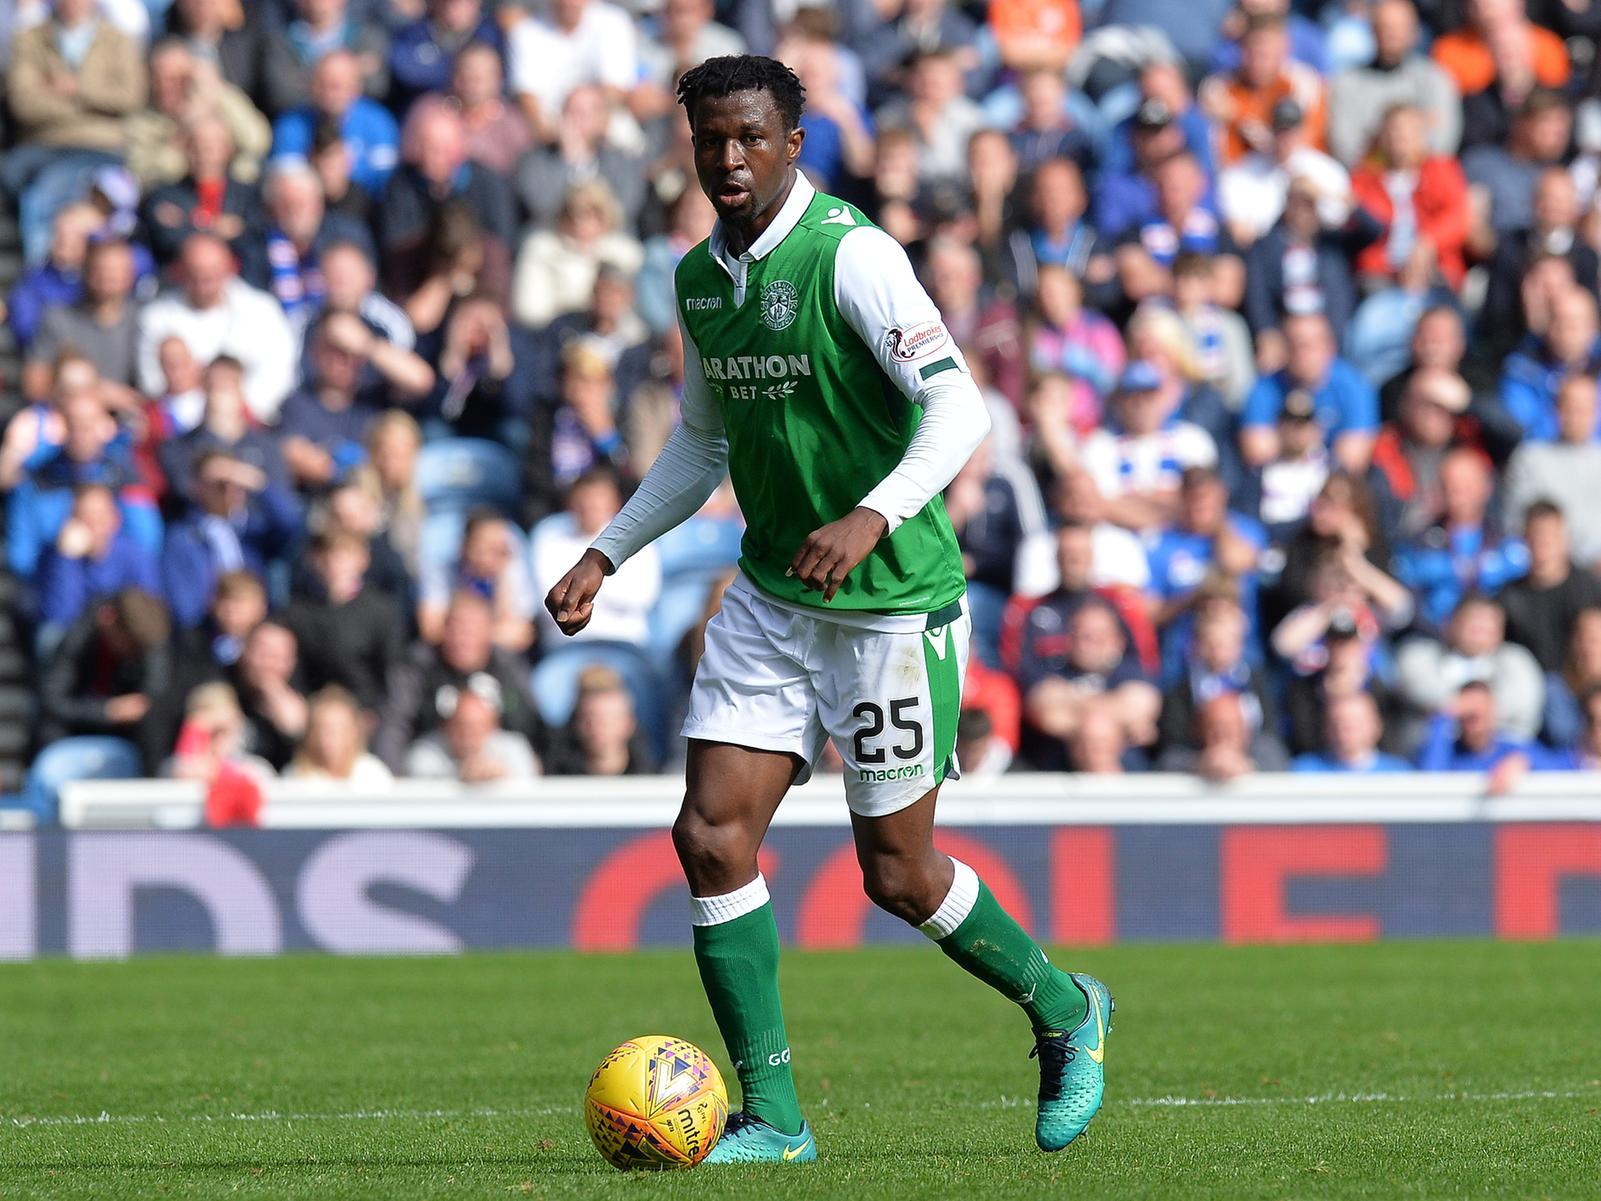 Played at the top level in Scotland with Hibs and Celtic, but could the 31-year-old Nigeria centre-back make the step up to the Premier League.